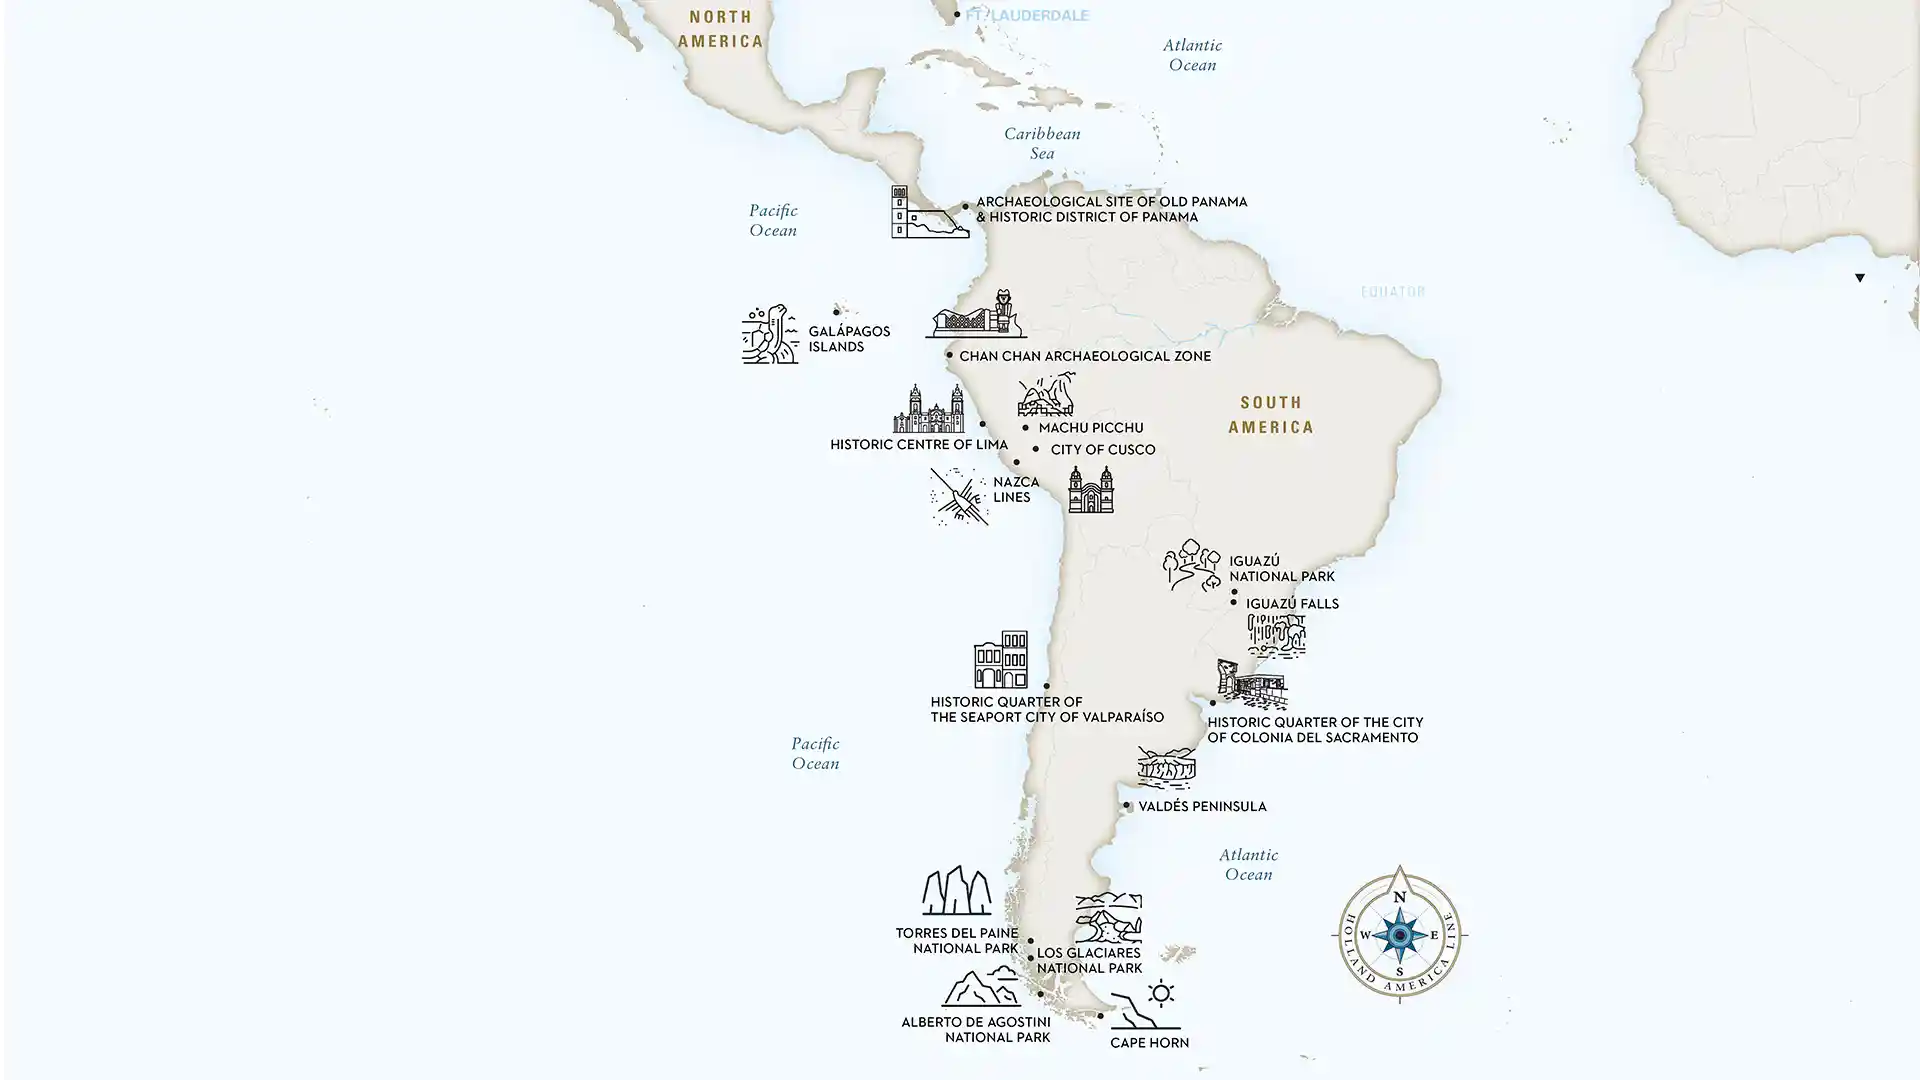 Map showing UNESCO World Heritage Sites near the coasts of South America.